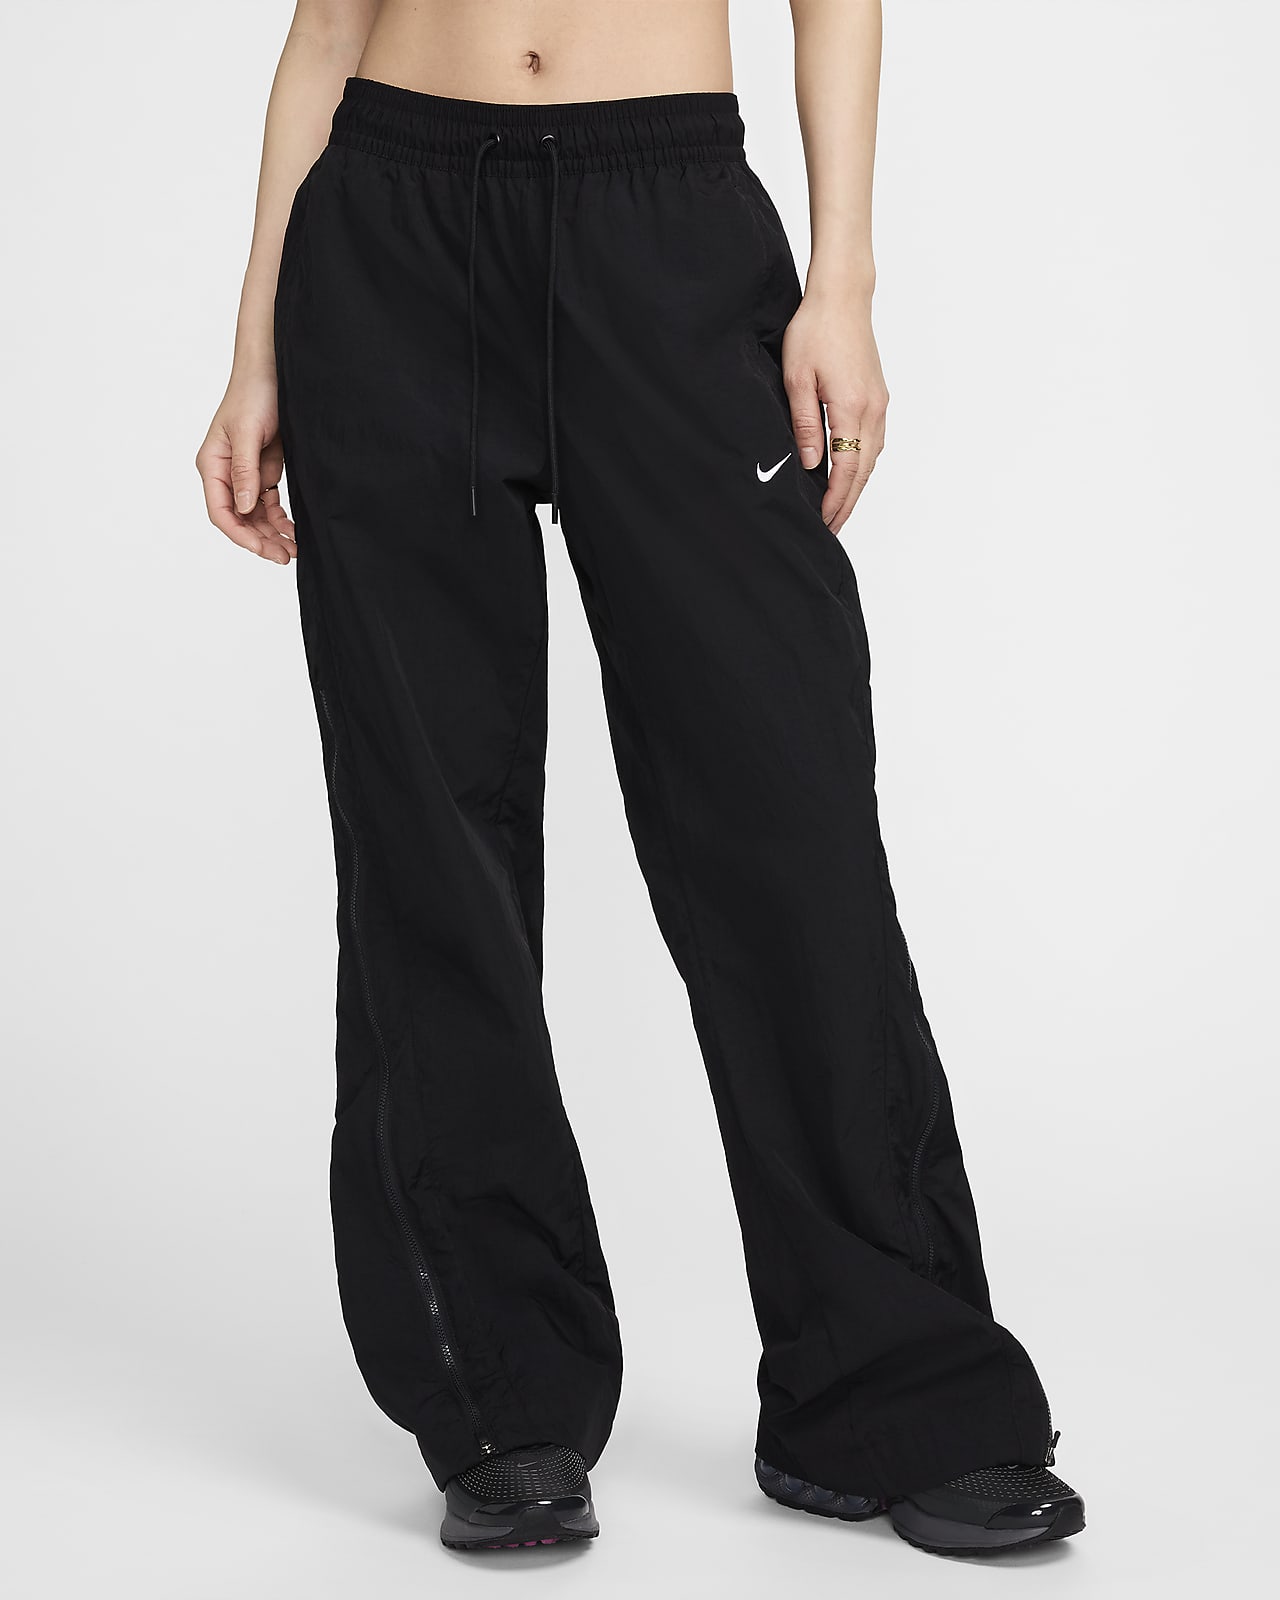 Nike Sportswear Collection Women's Mid-Rise Repel Zip Pants